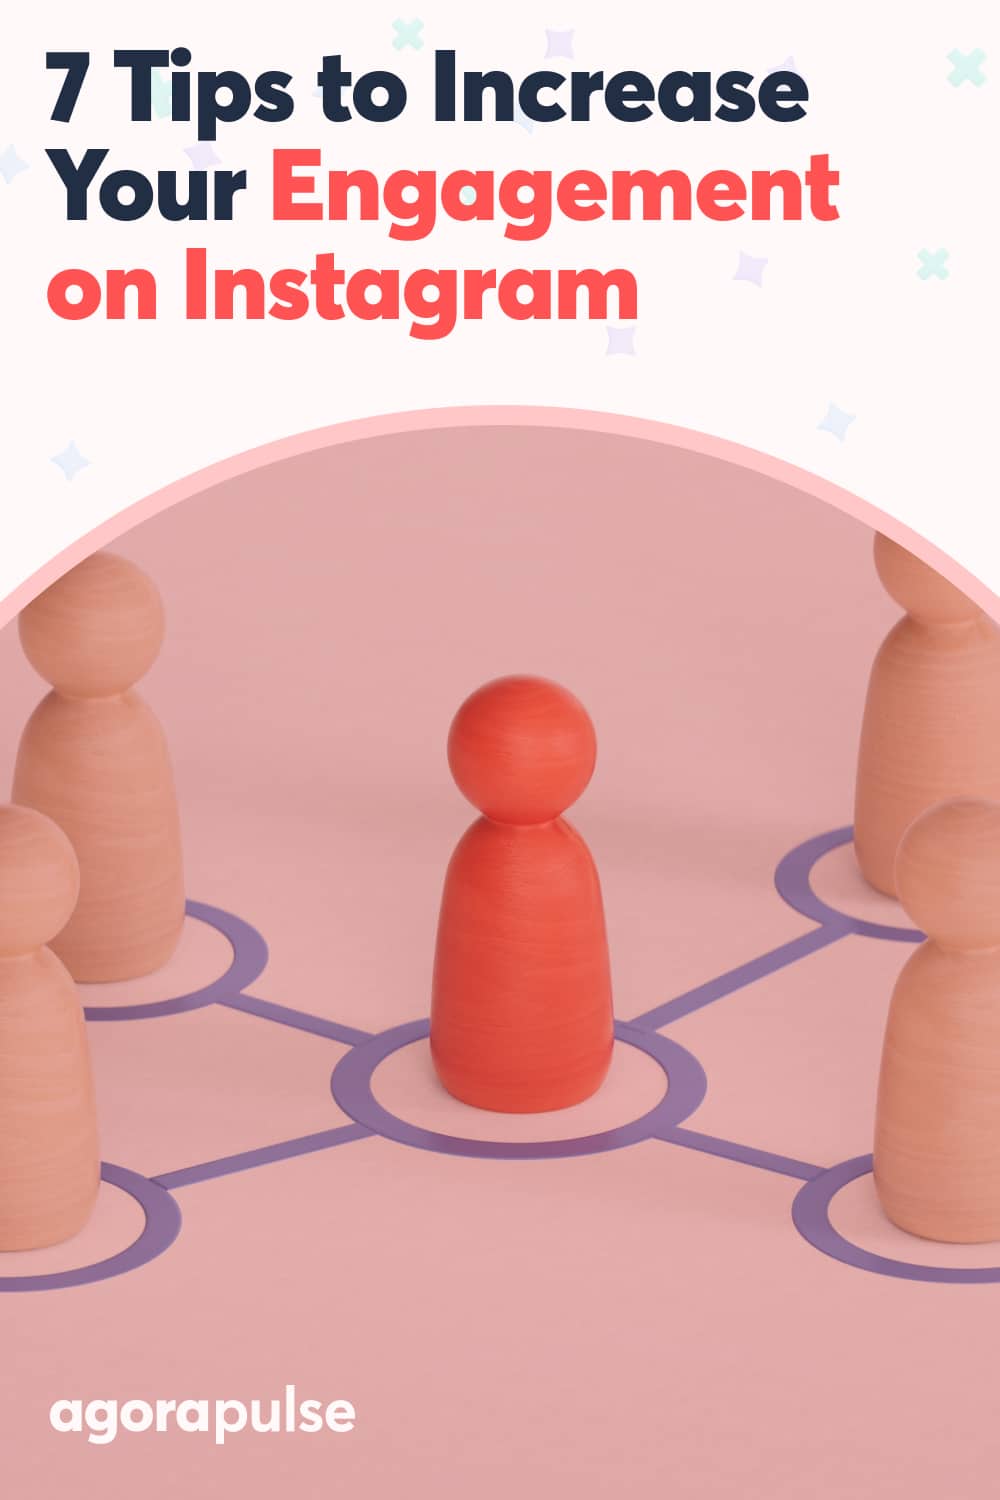 7 Tips for Increasing Engagement and Creating Deeper Connections on Instagram